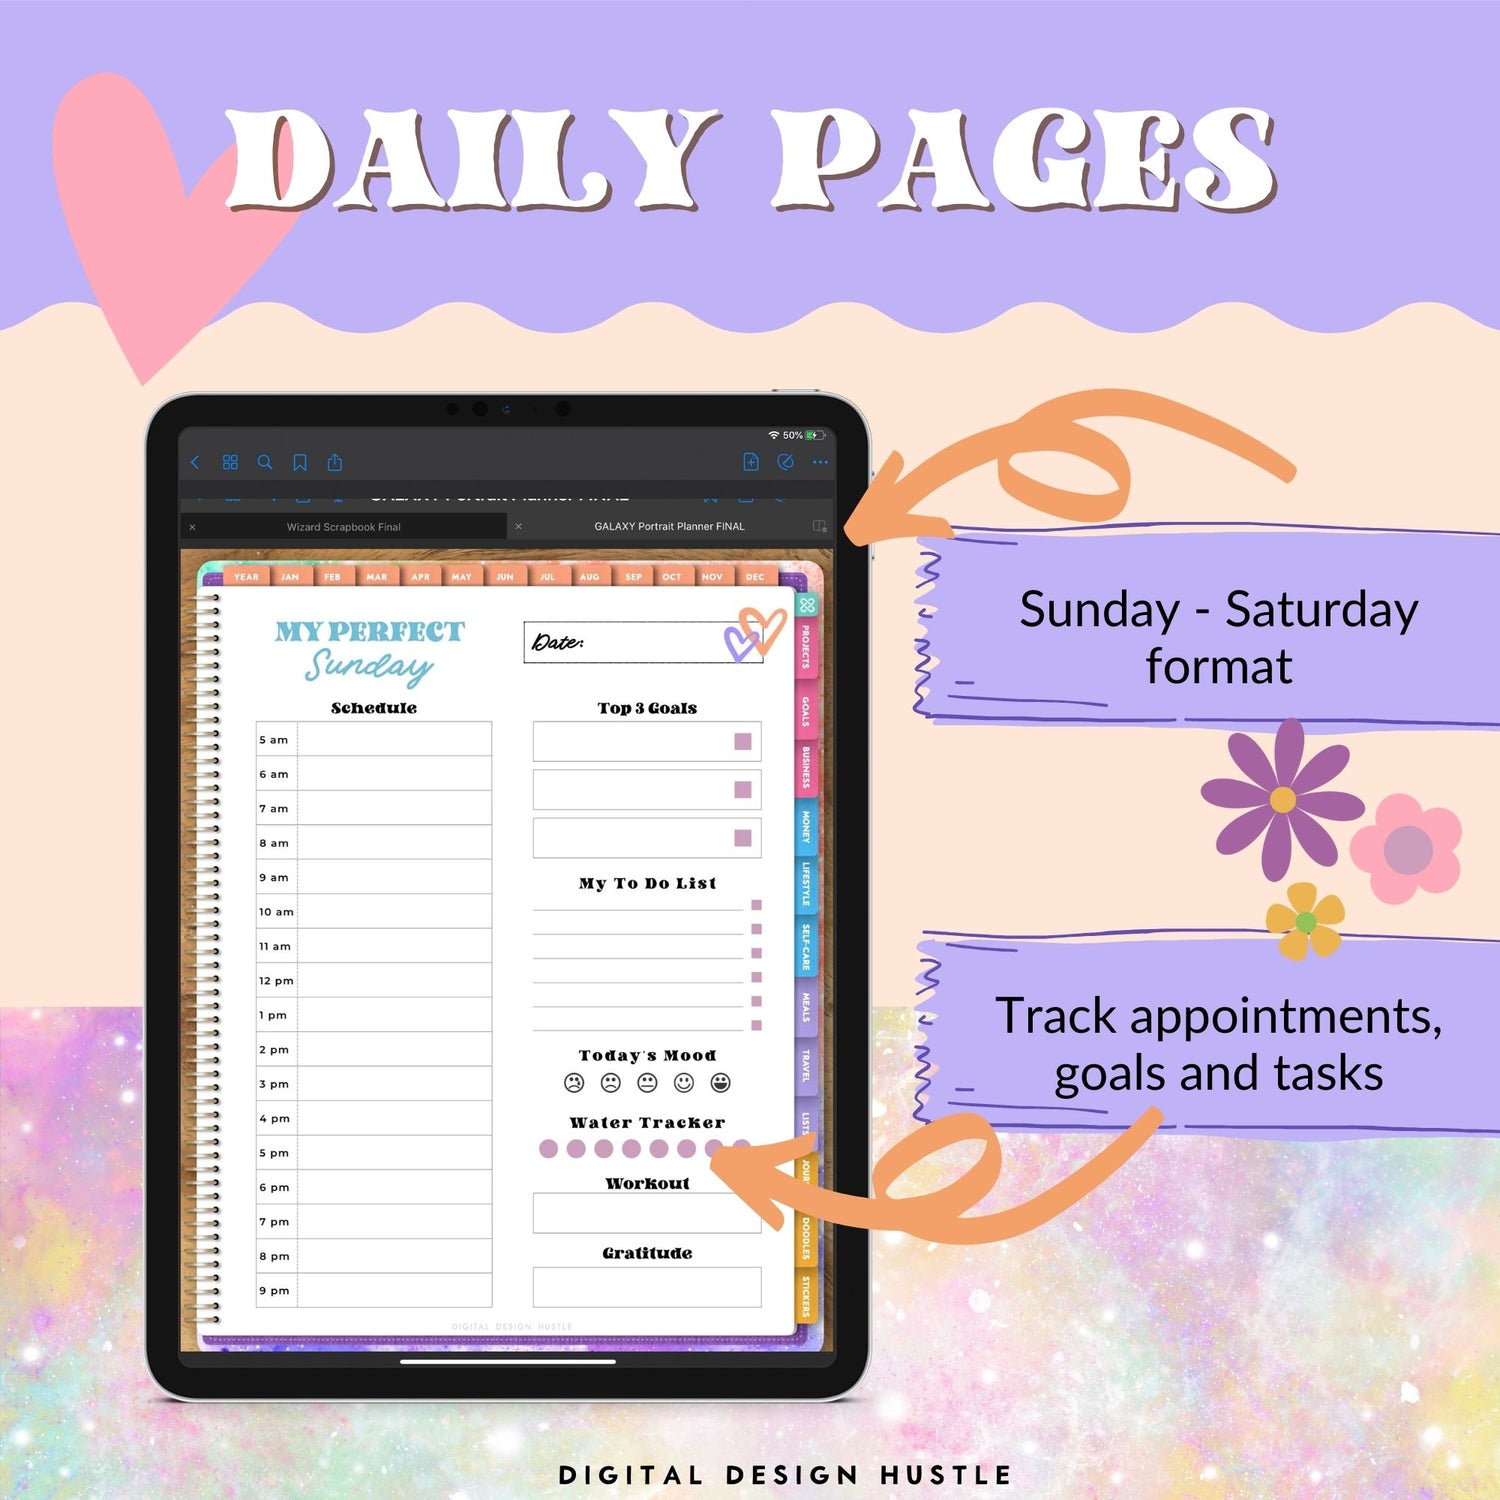 Plan your perfect day with this digital galaxy print Digital Life Planner. This undated digital planner has all the tools you need to get organized in your life. This All In One Digital Planner will help you focus on your yearly, monthly, weekly &amp; daily plans as well as goals, finances, lifestyle, wellness, business, mindset and more.